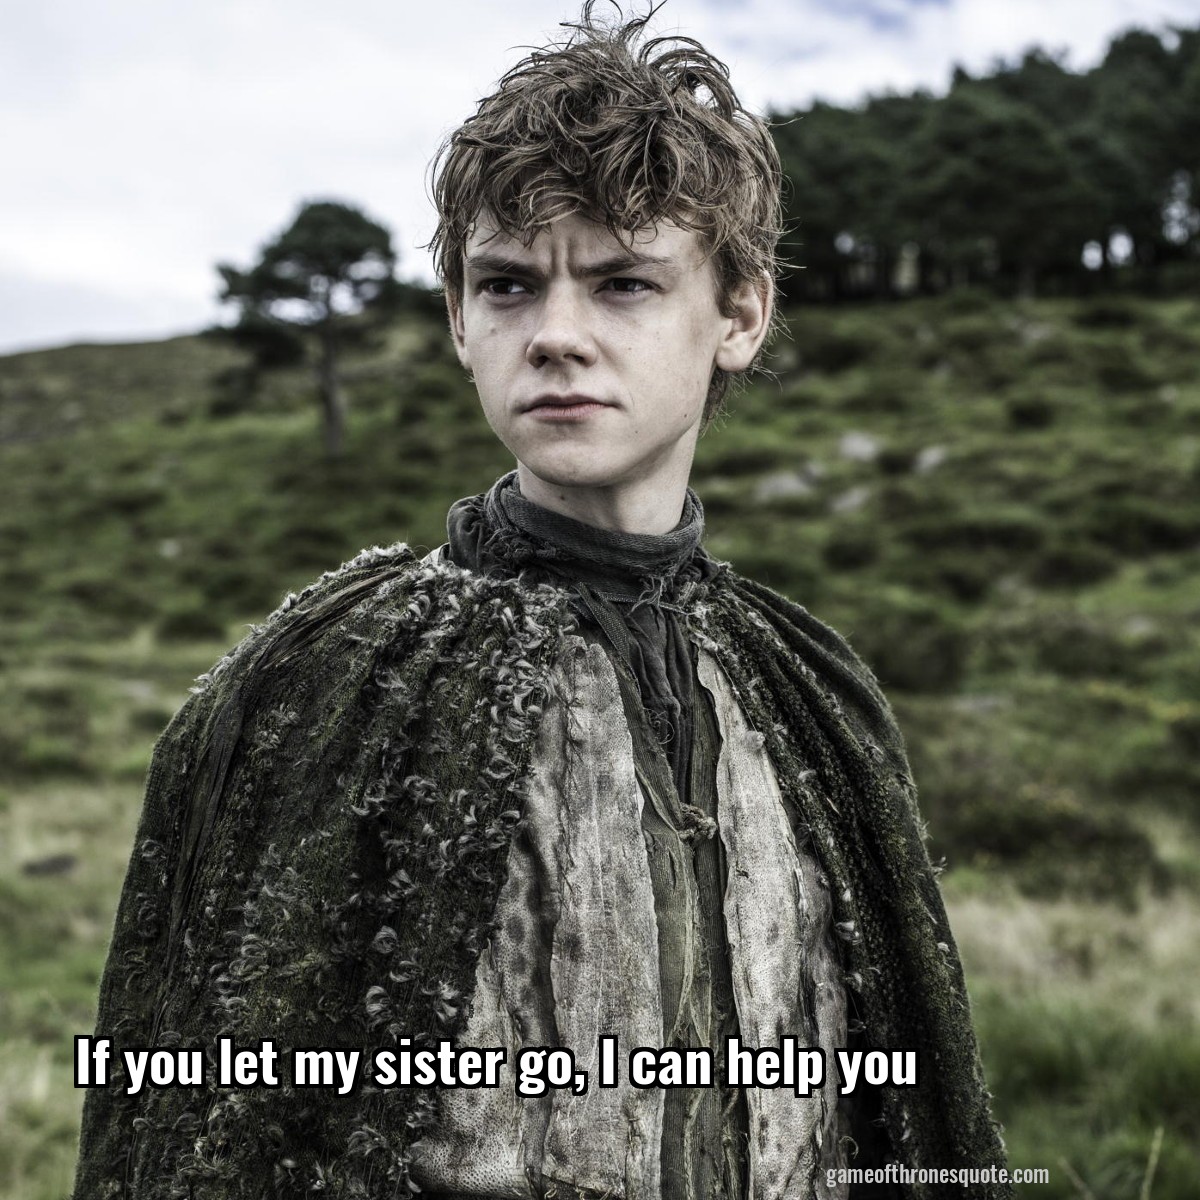 If you let my sister go, I can help you